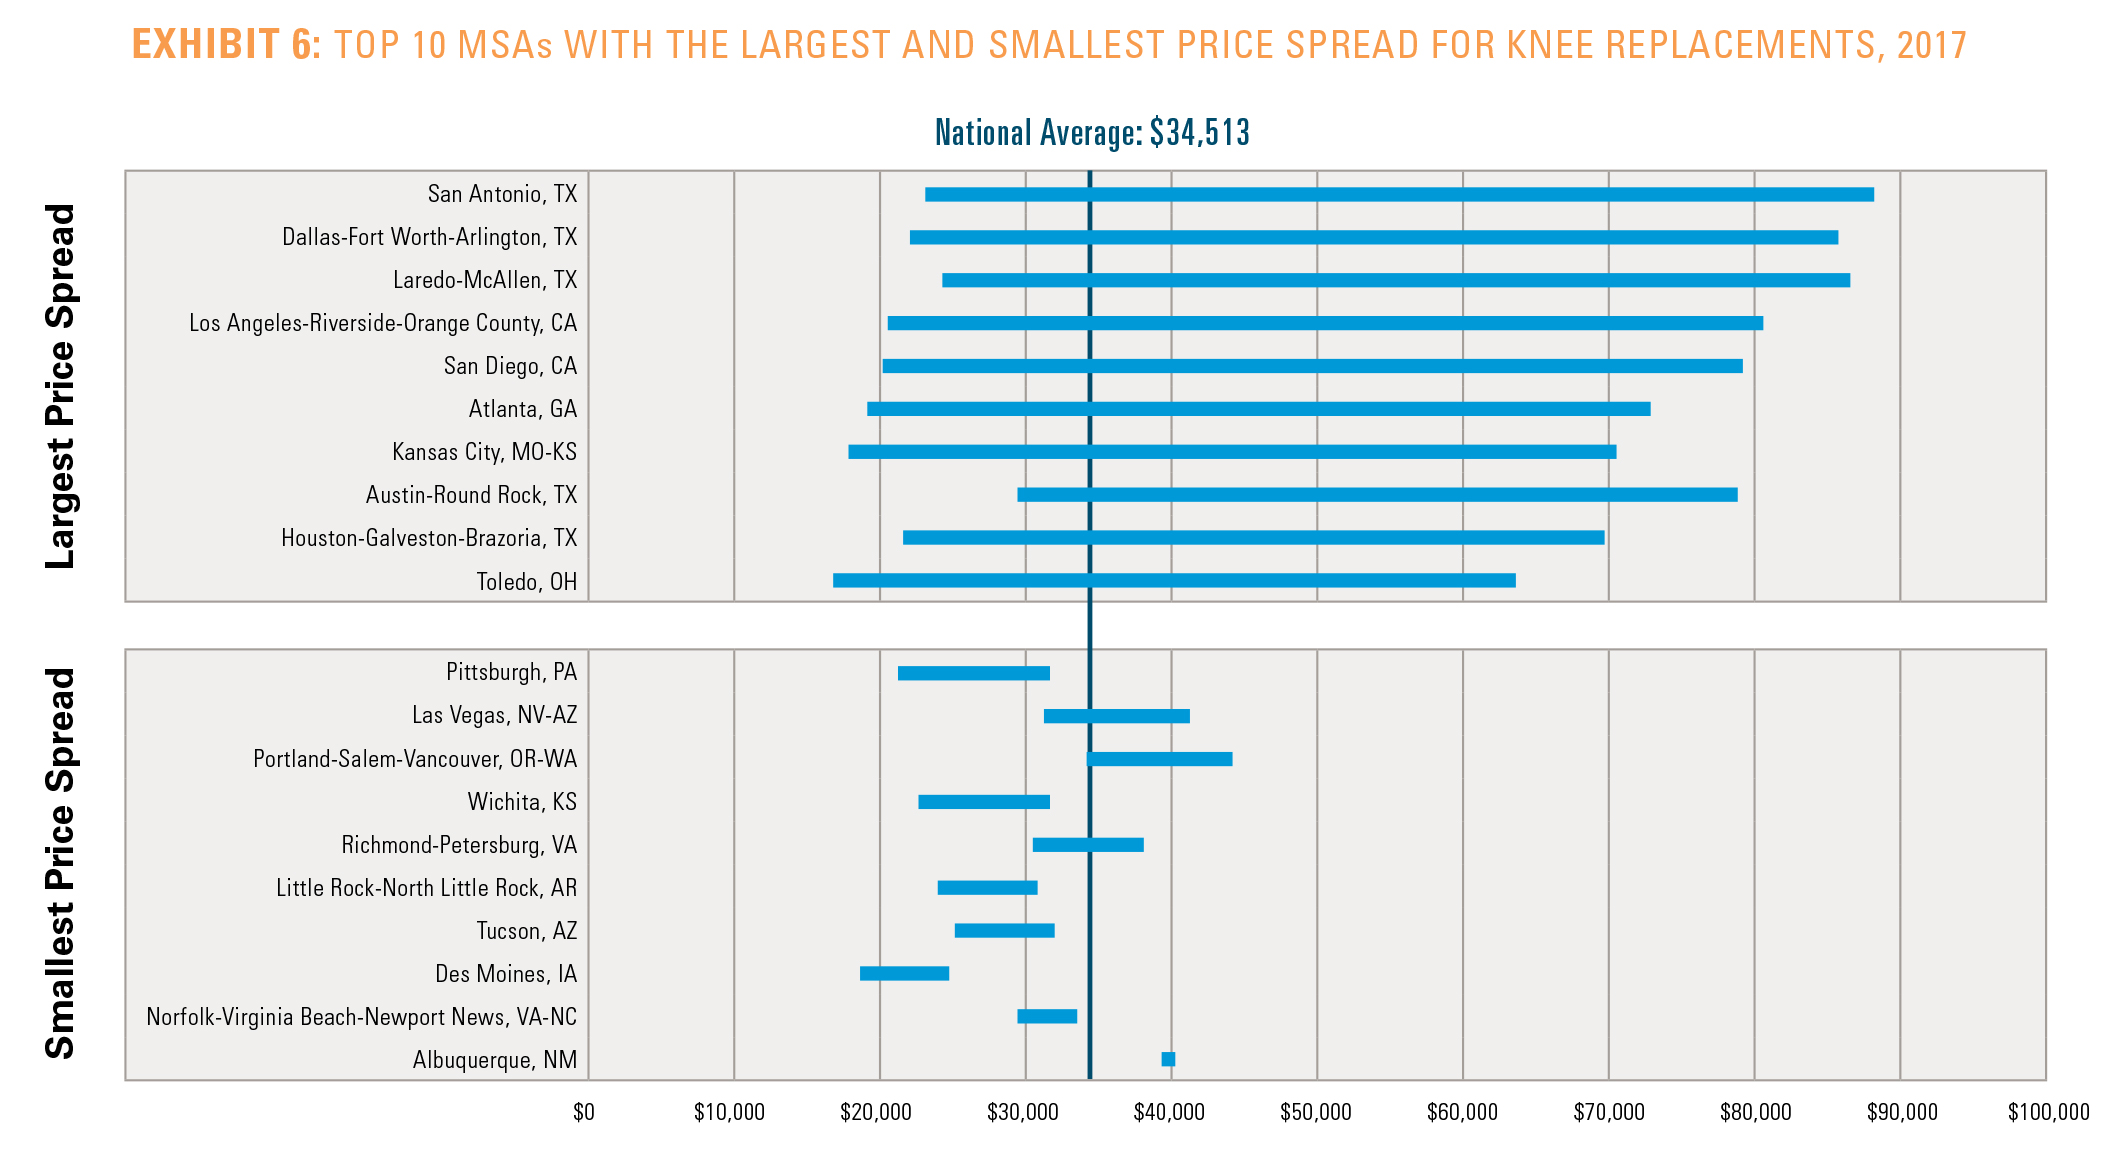 EXHIBIT 6: TOP 10 MSAs WITH THE LARGEST AND SMALLEST PRICE SPREAD FOR KNEE REPLACEMENTS, 2017